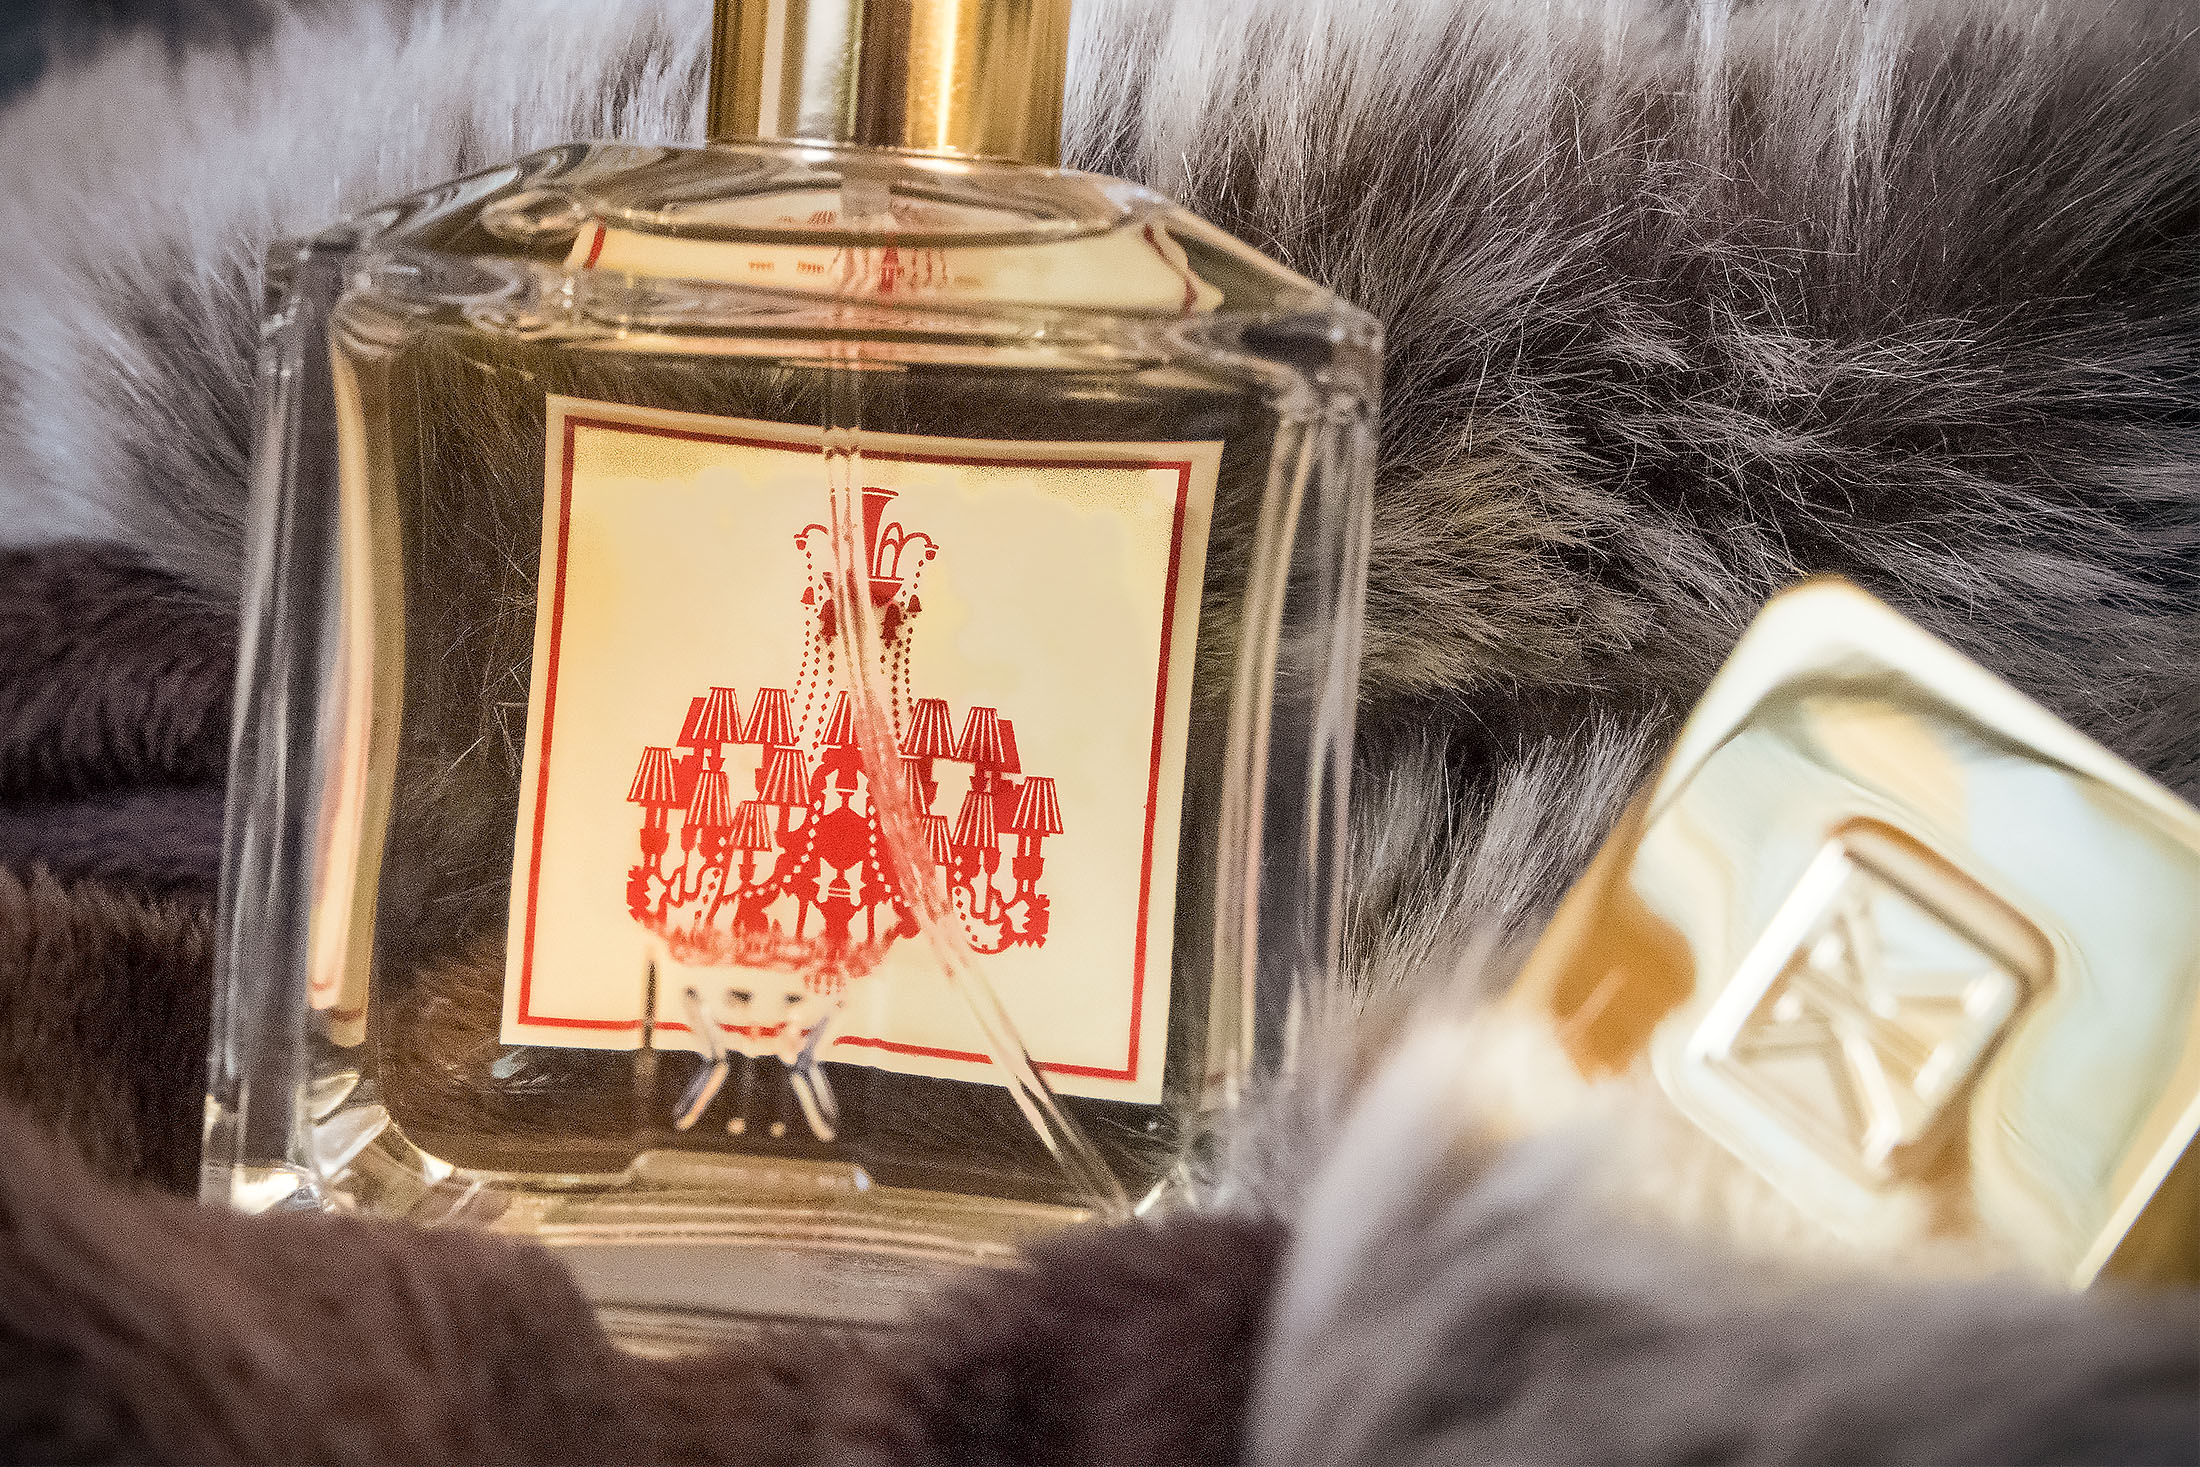 How Baccarat Rouge 540 by Maison Francis Kurkdjian Captured Tradition While  Creating a New Avant-garde in Fragrance